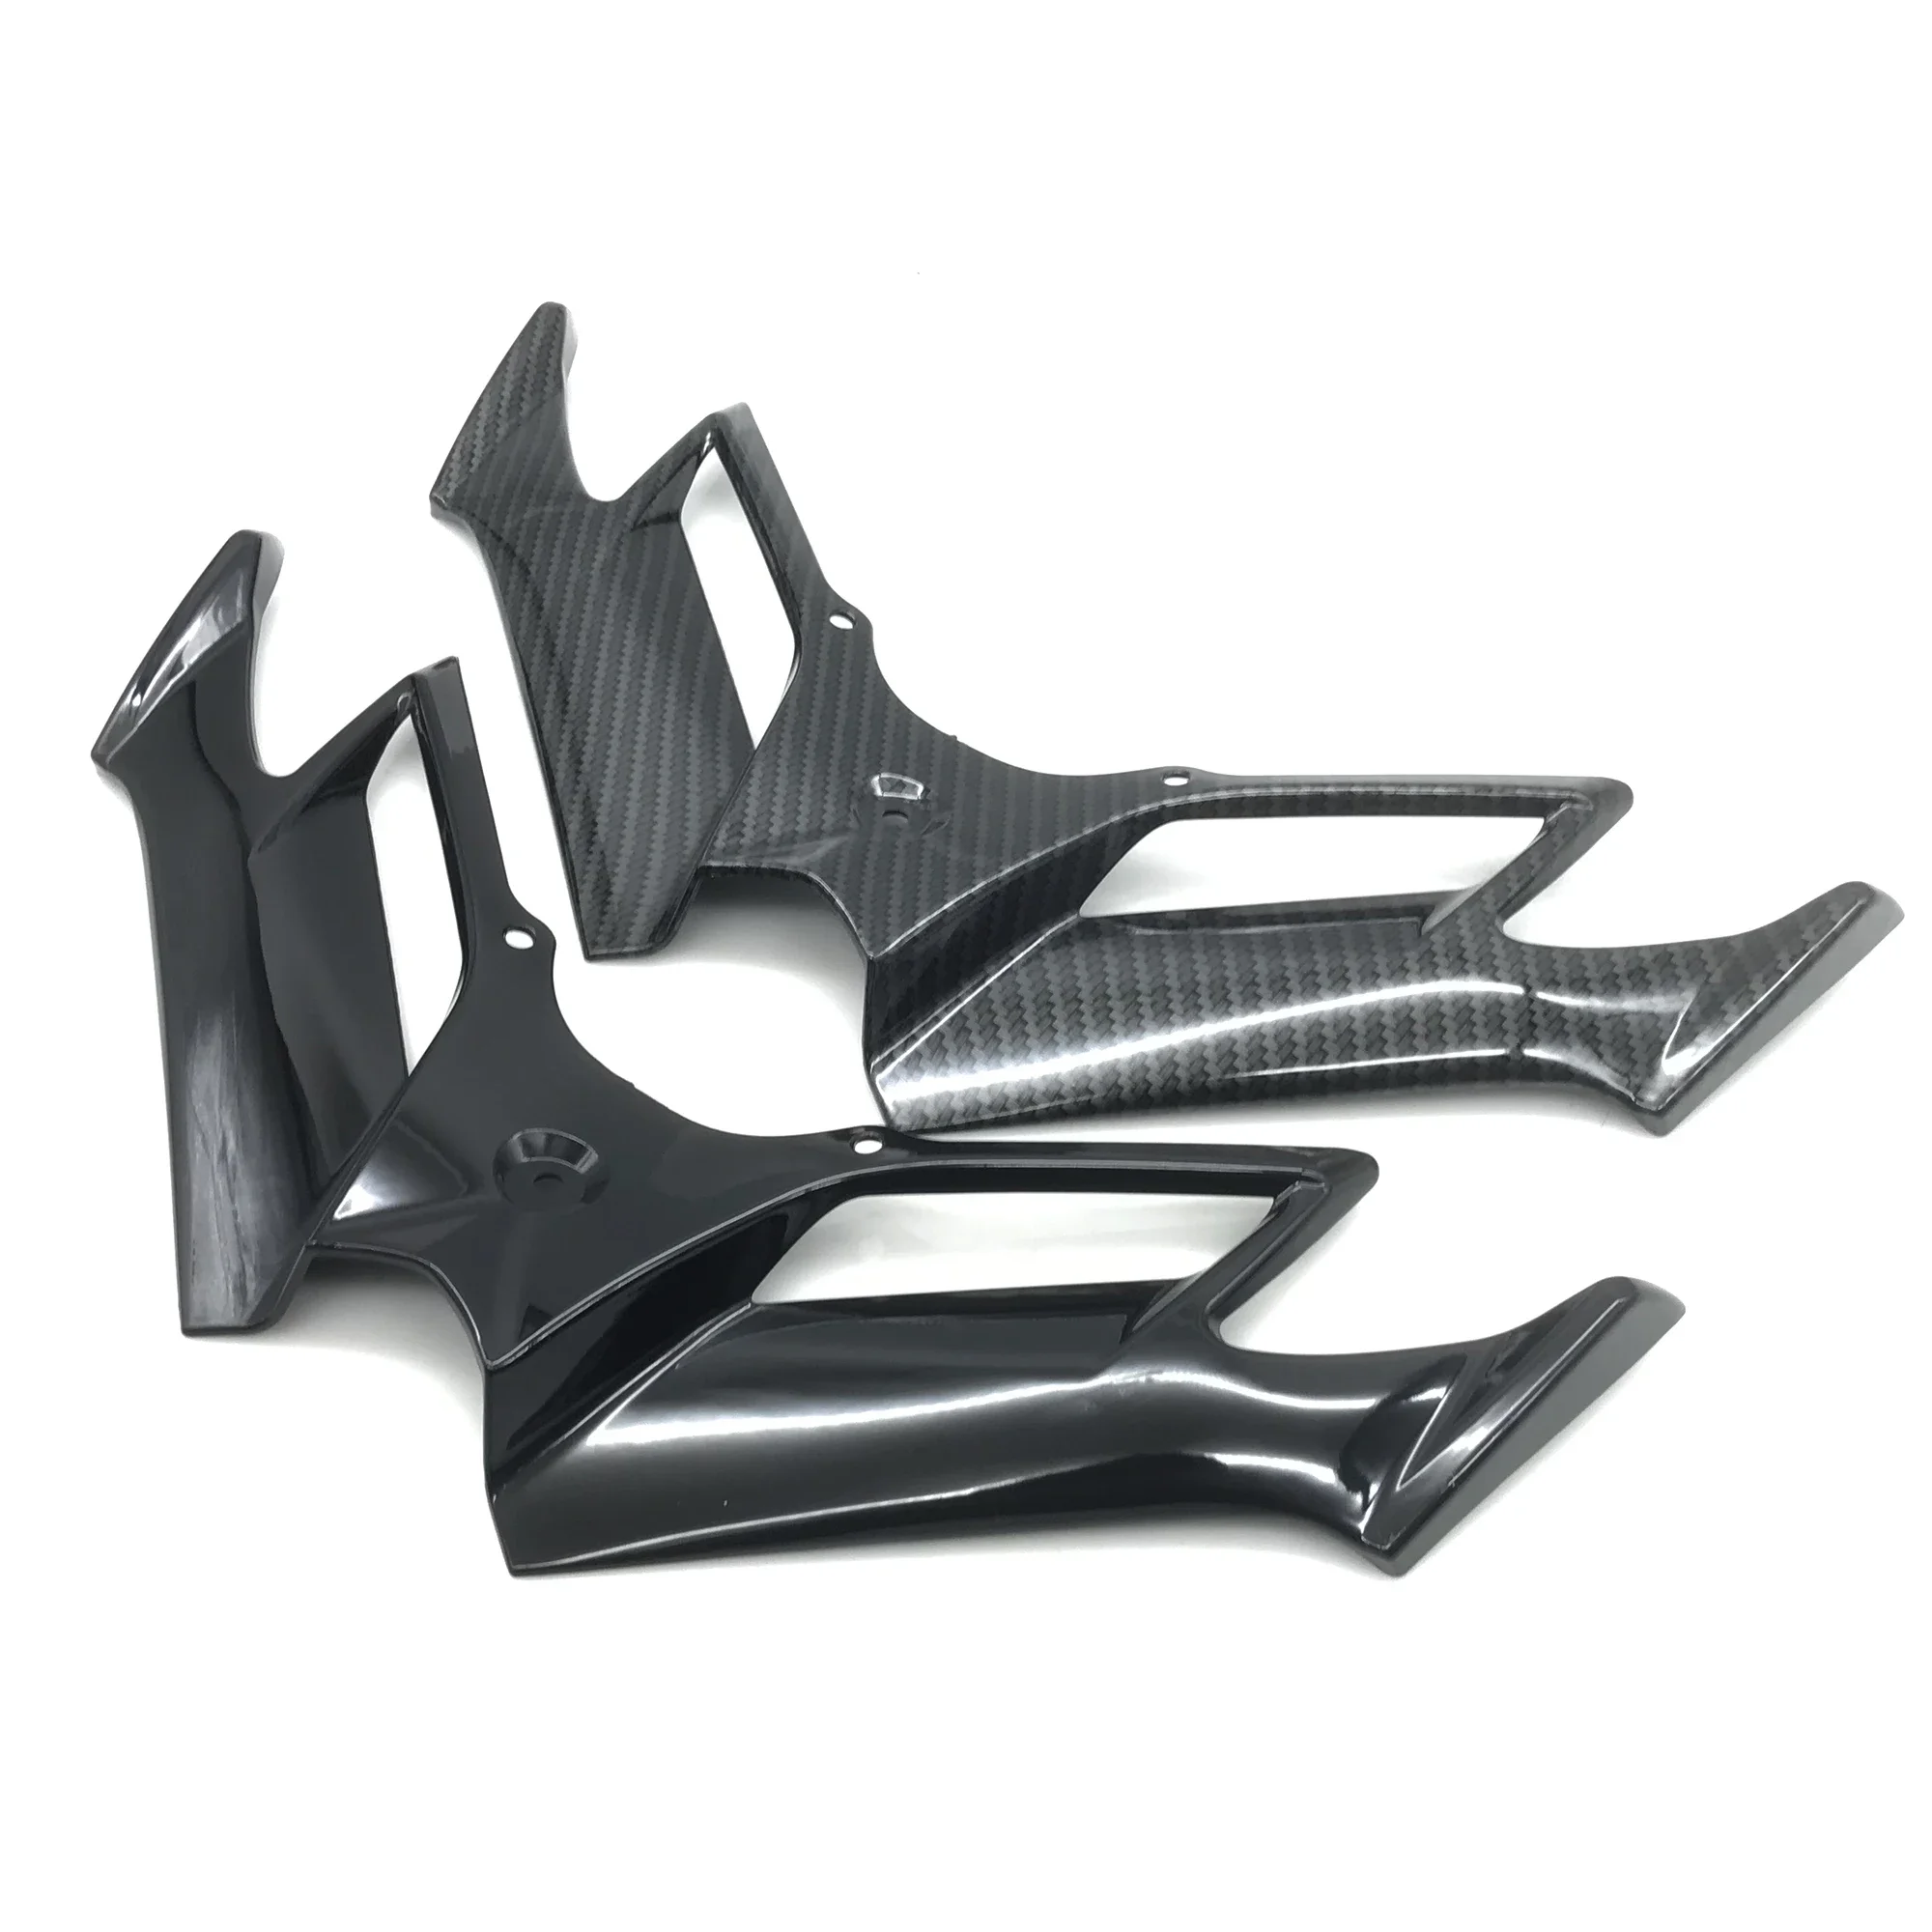 

For Yamaha NMAX N-MAX 125 155 NMAX125 NMAX155 Motorcycle Front Aerodynamic Fairing Winglets Carbon Fiber Cover Protection Guard